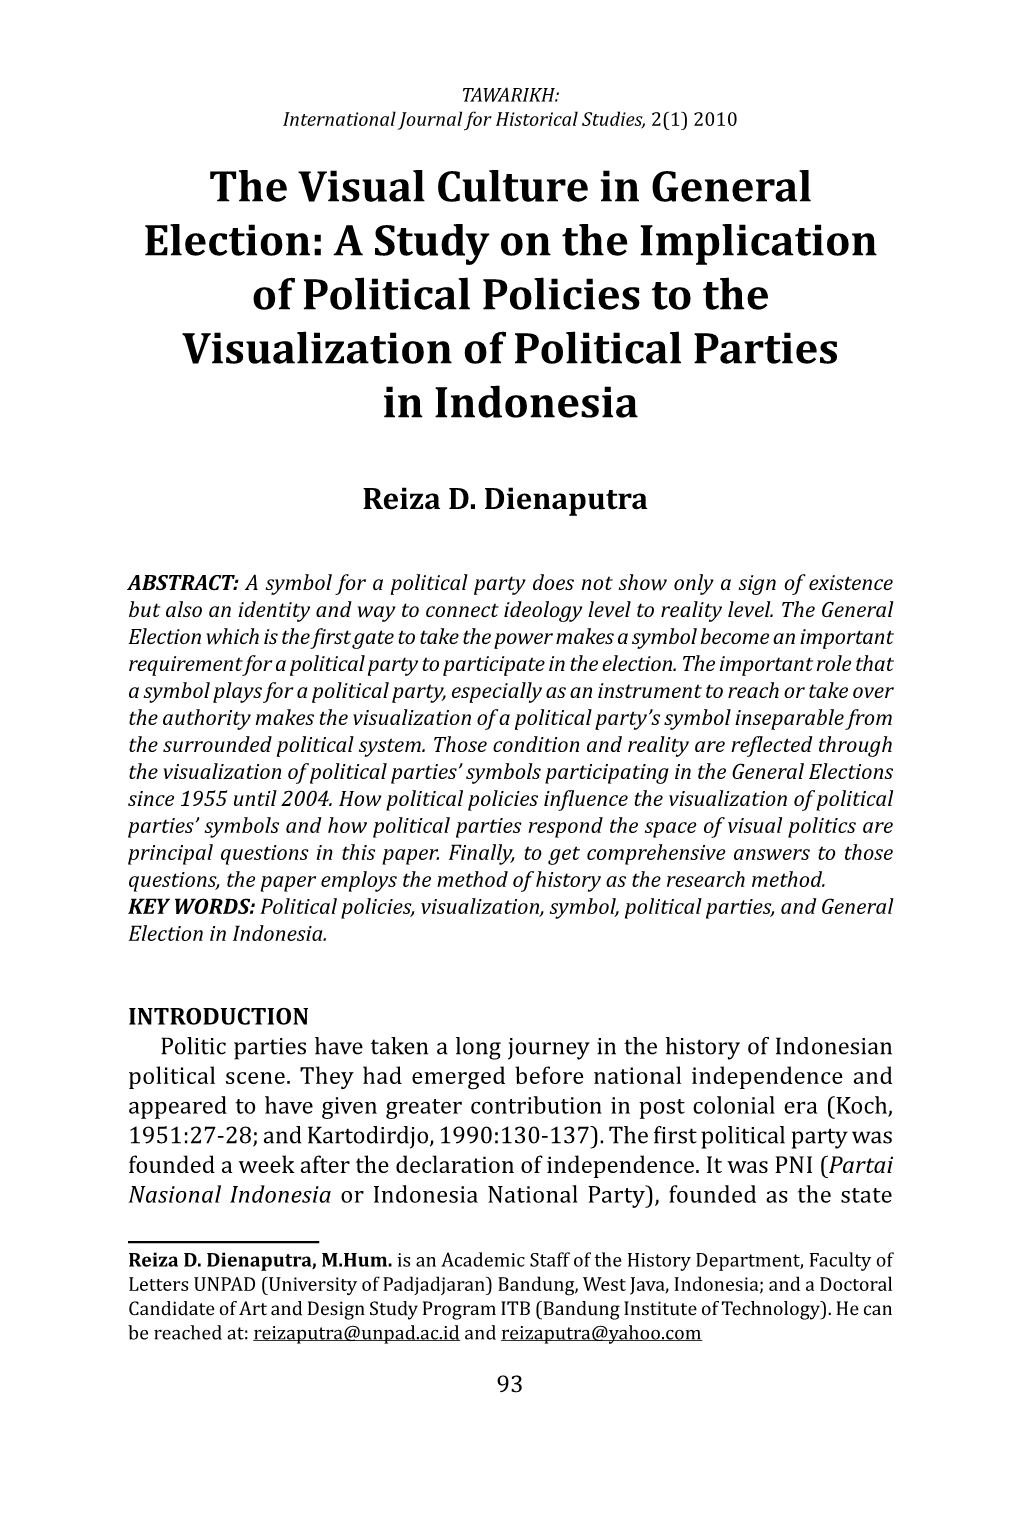 The Visual Culture in General Election: a Study on the Implication of Political Policies to the Visualization of Political Parties in Indonesia